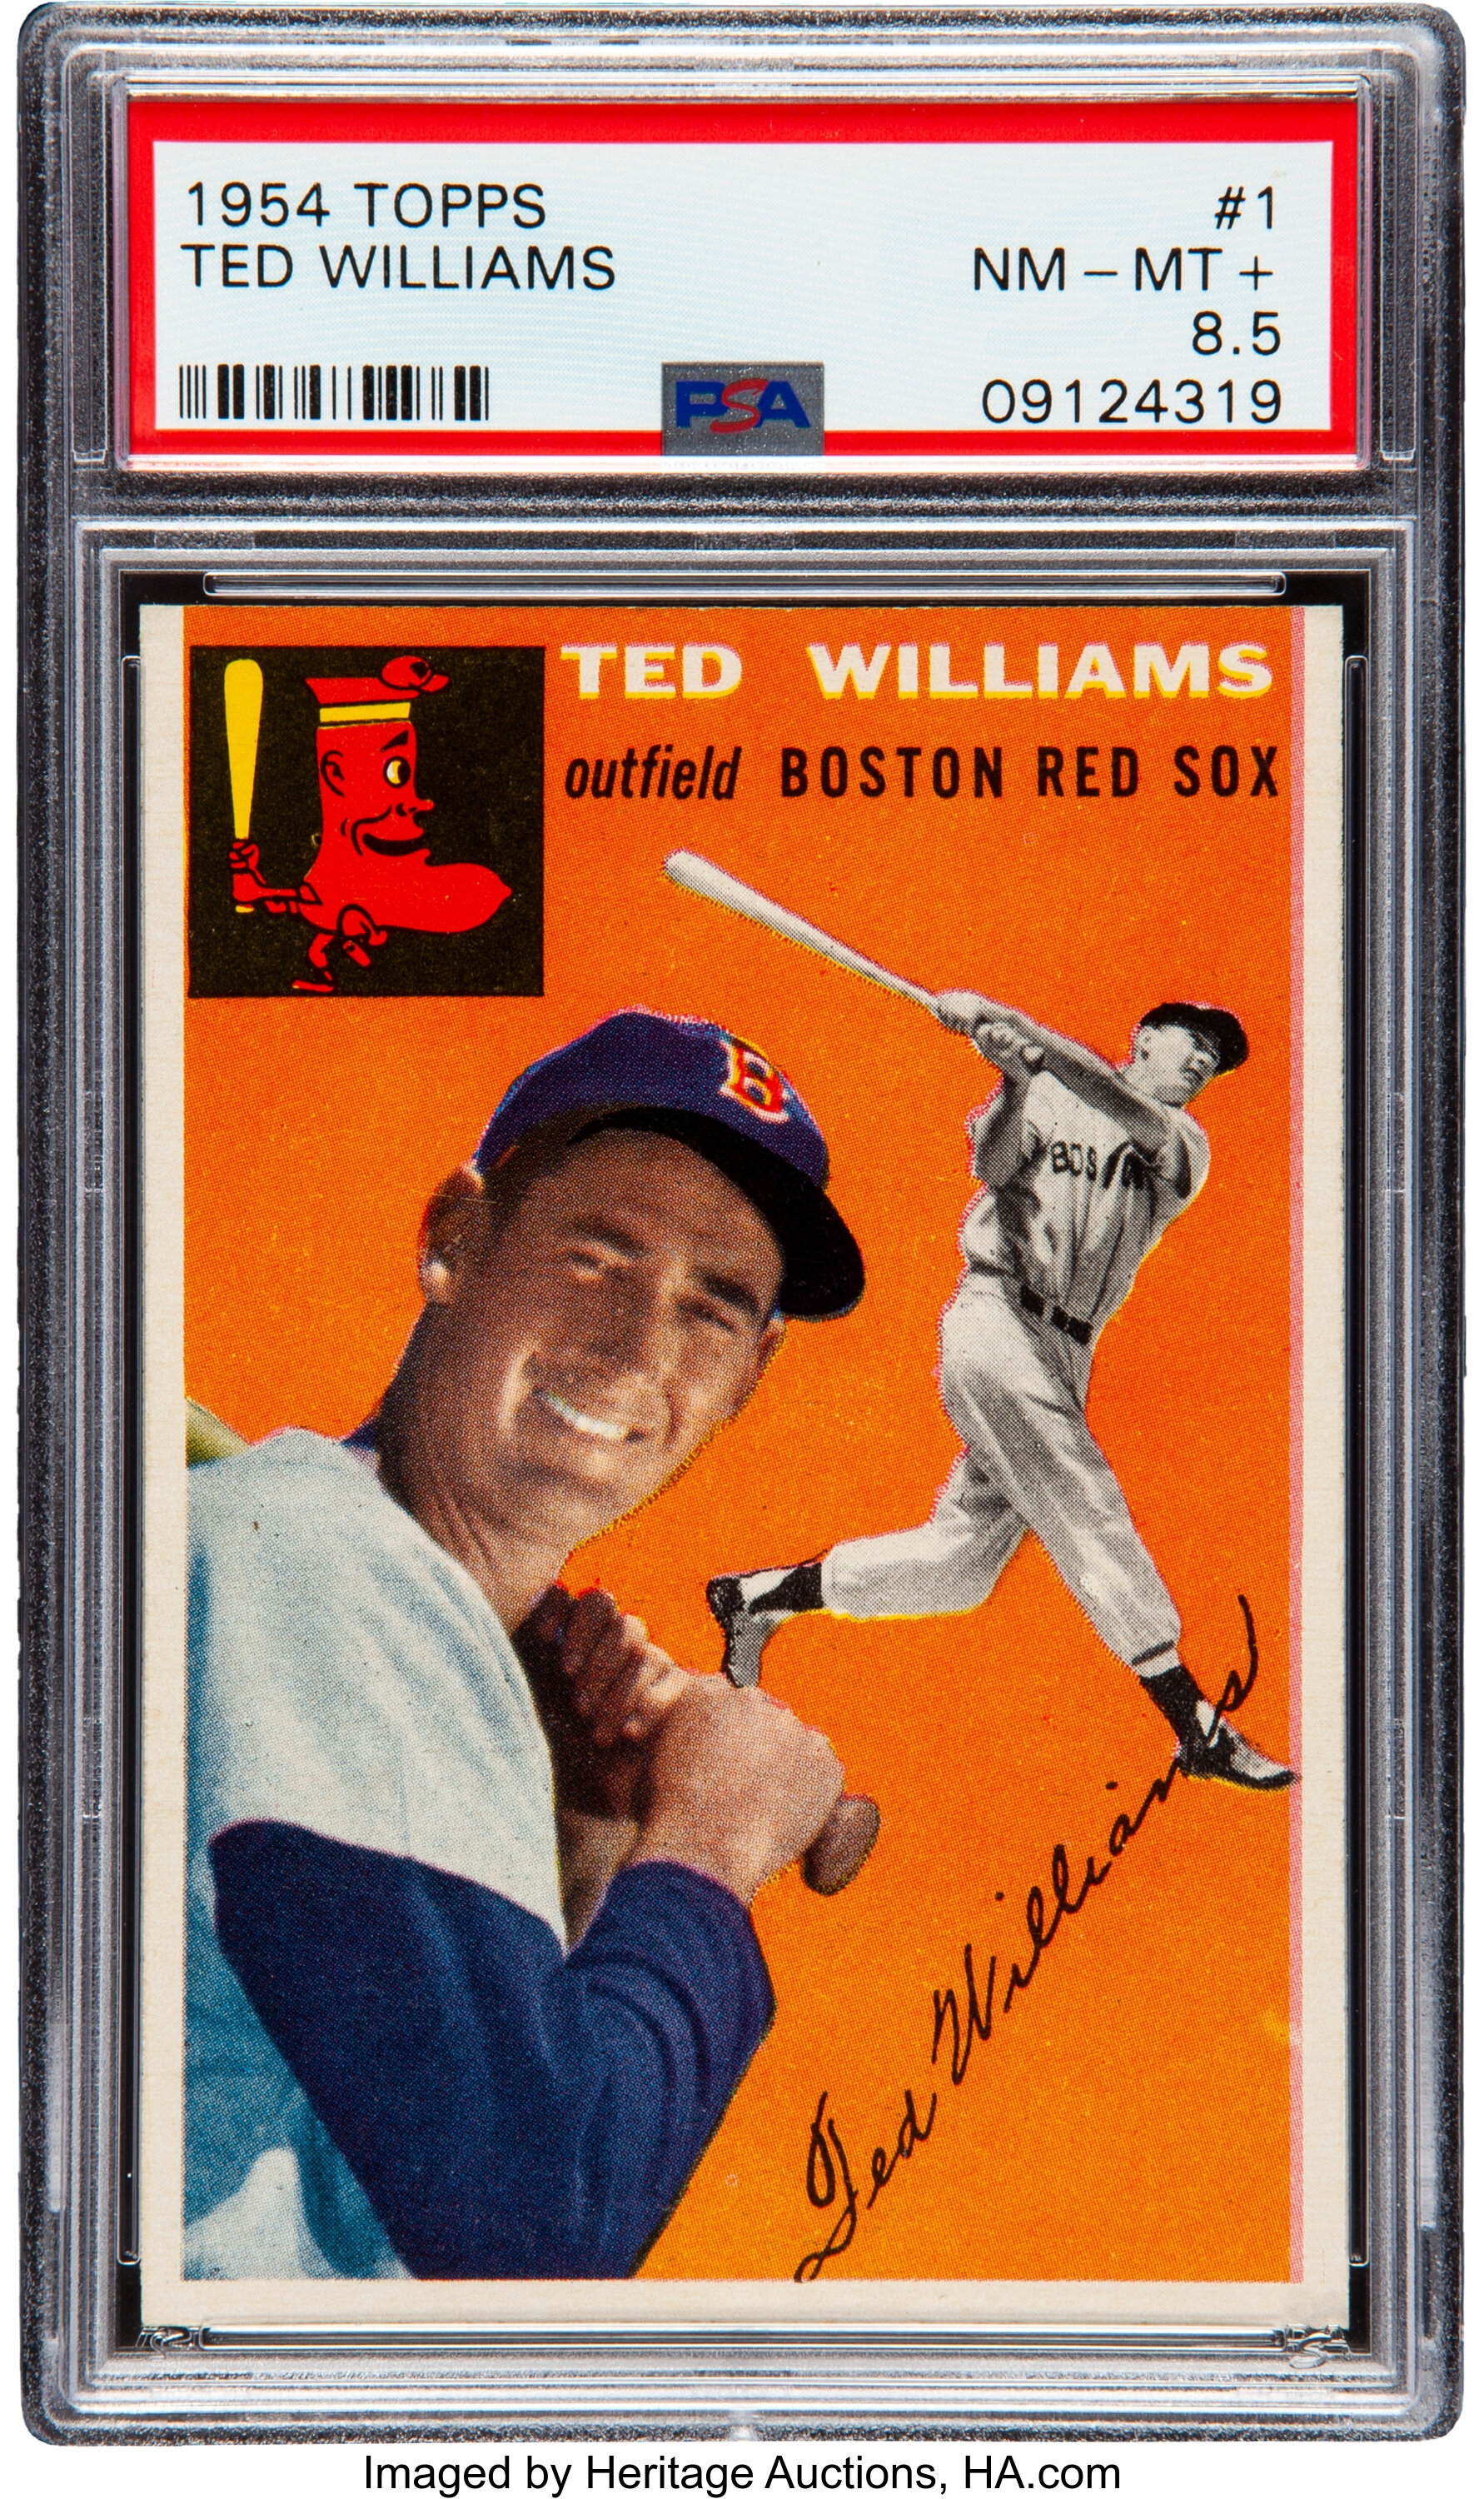 Issued by Bowman Gum Company  Ted Williams, Outfield, Boston Red